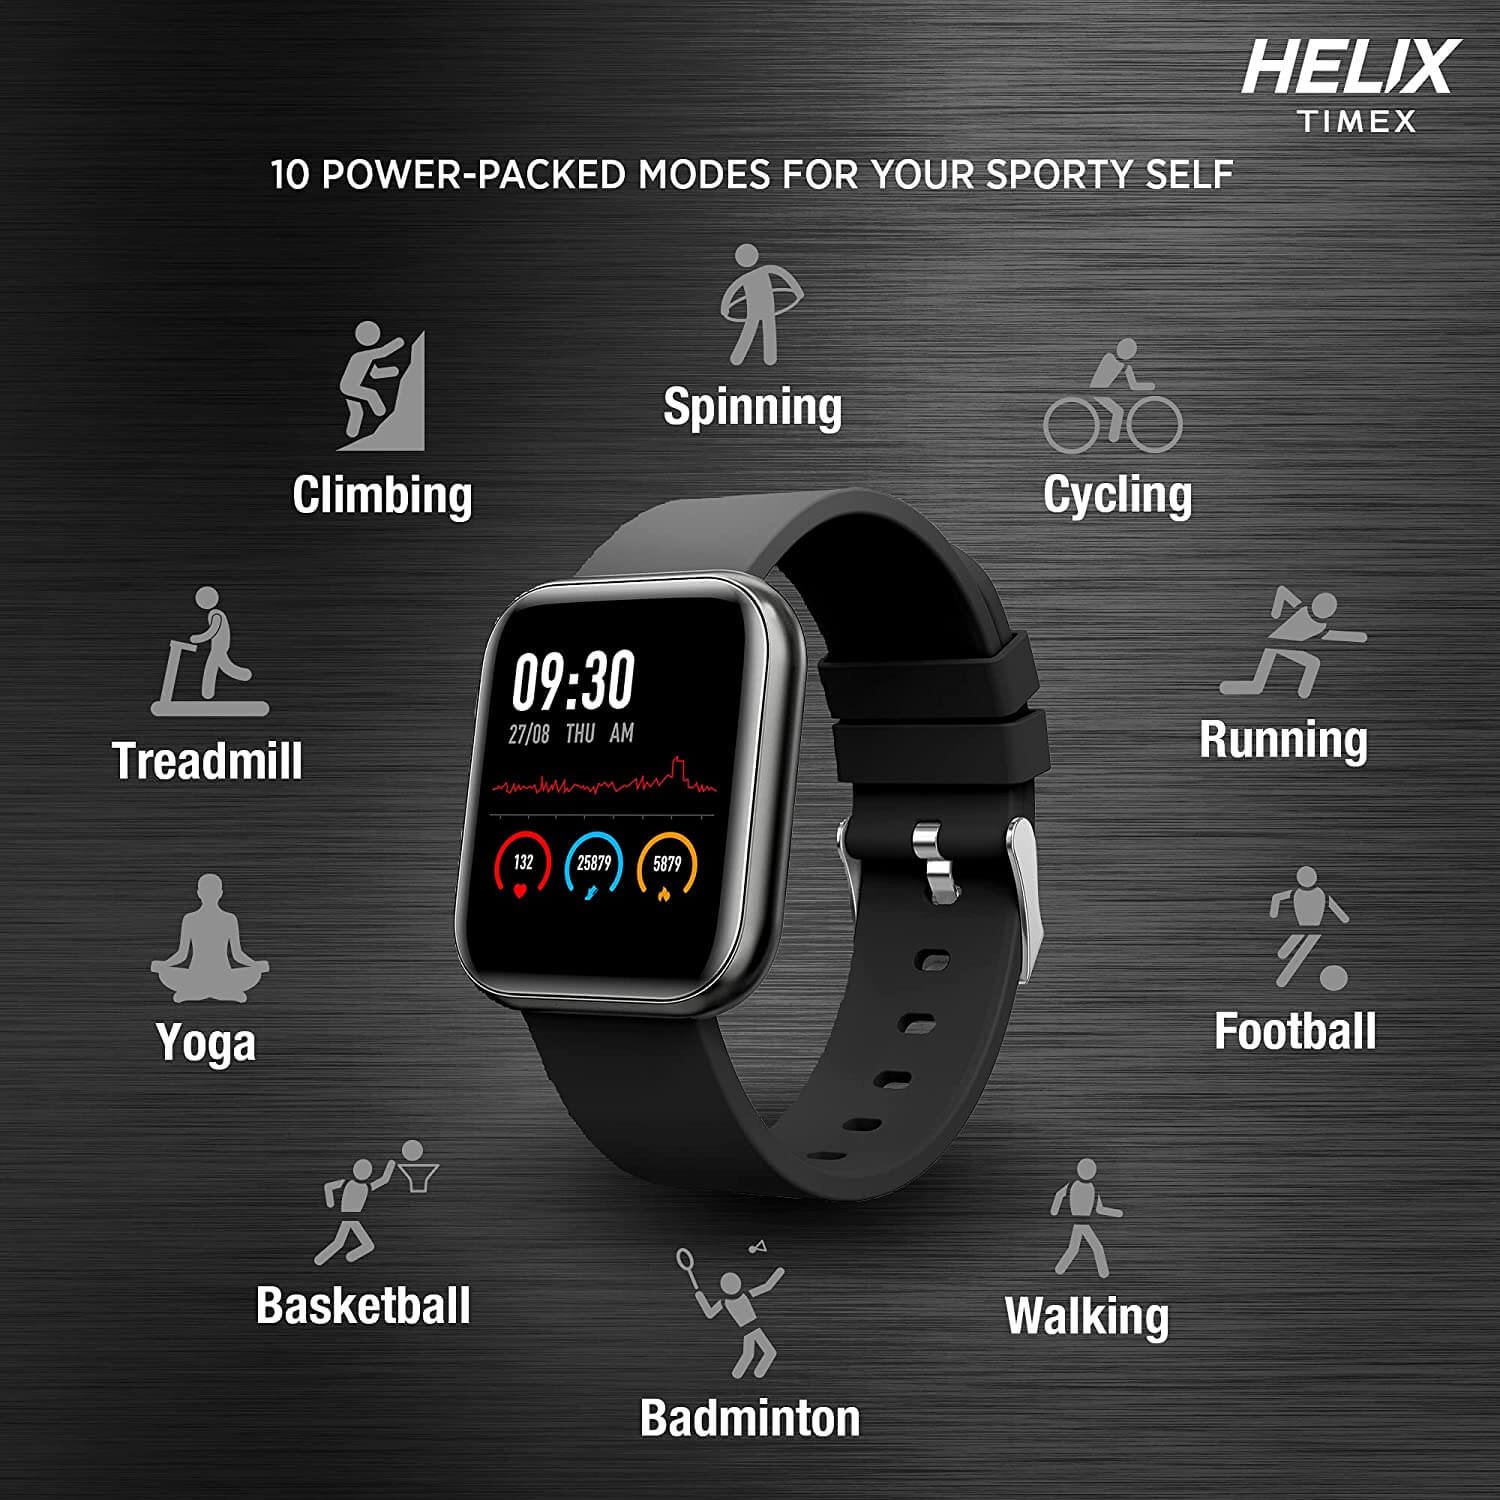 https://shoppingyatra.com/product_images/Helix Timex Metalfit SPO2 smartwatch with Full Metal Body and Touch to Wake Feature, HRM, Sleep & Activity Tracker, 10 Days Battery and Female Health Monitor3.jpg